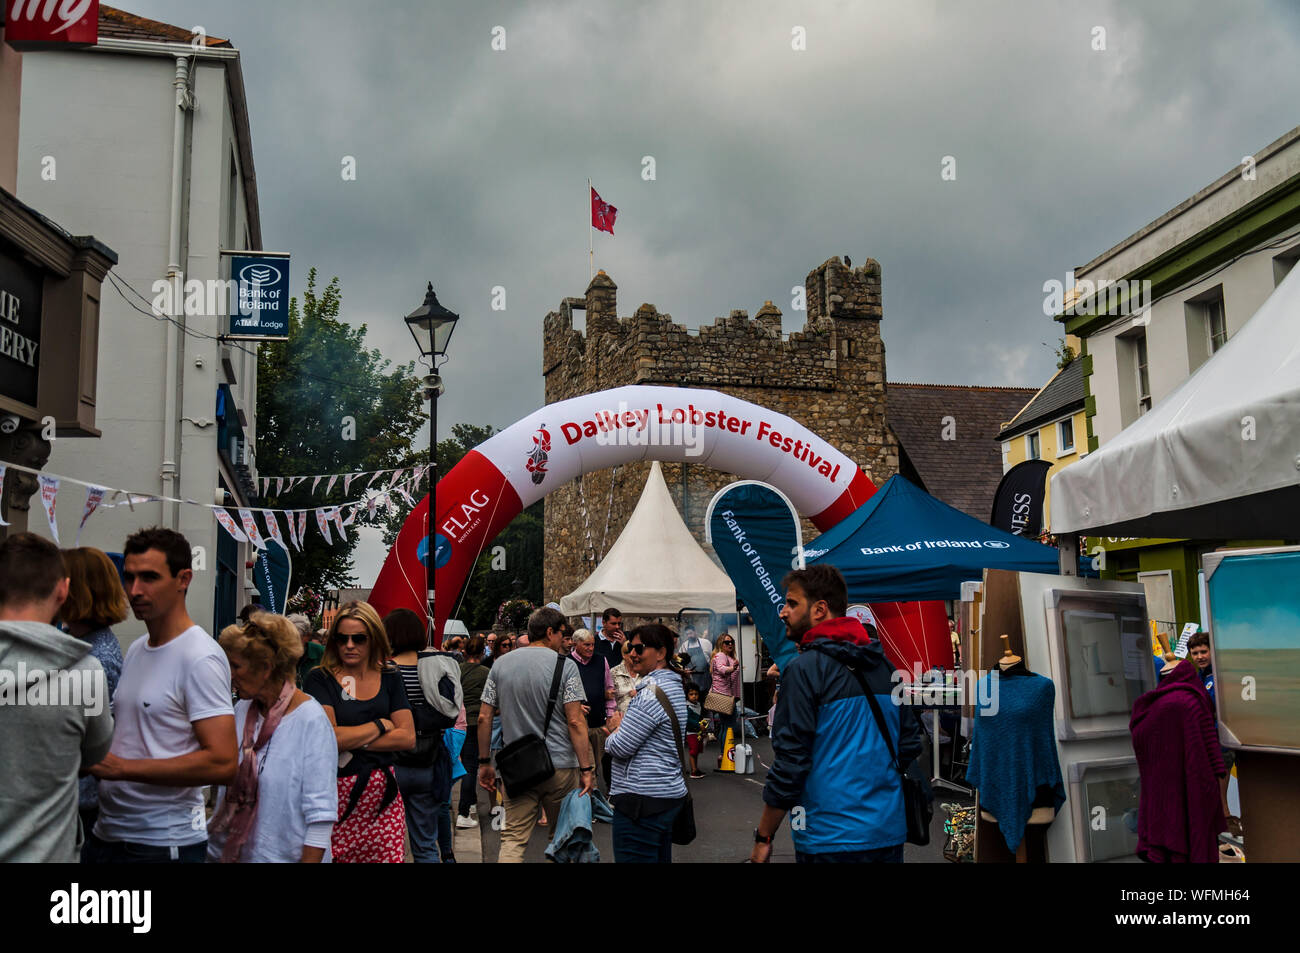 Тriumphal arch of the Festival. Main gate to the Festival. Dalkey, Dublin, Ireland.25 August 2019.  Seafood “Dalkey Lobster Festival” Stock Photo